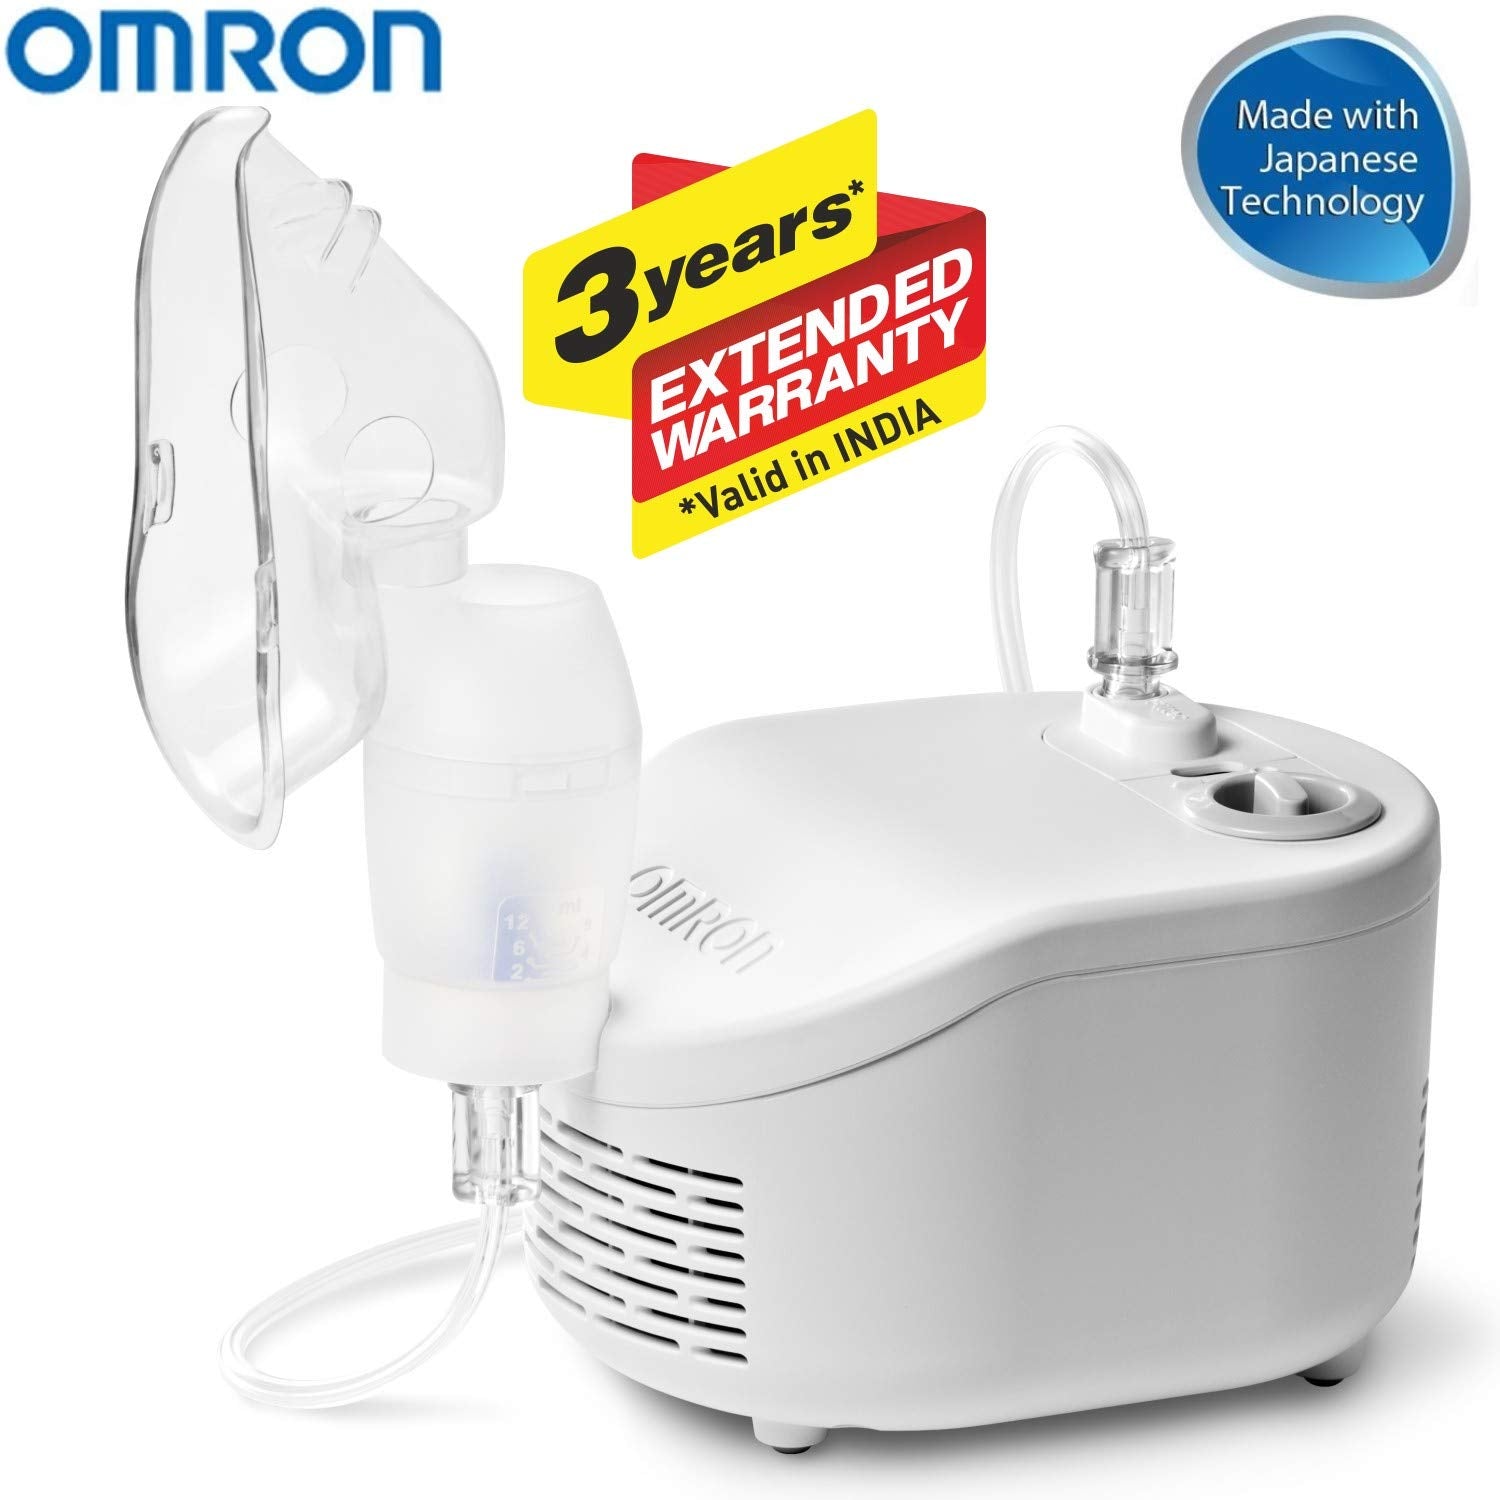 Nebulizer Machine for all- Welcome winters without worries!